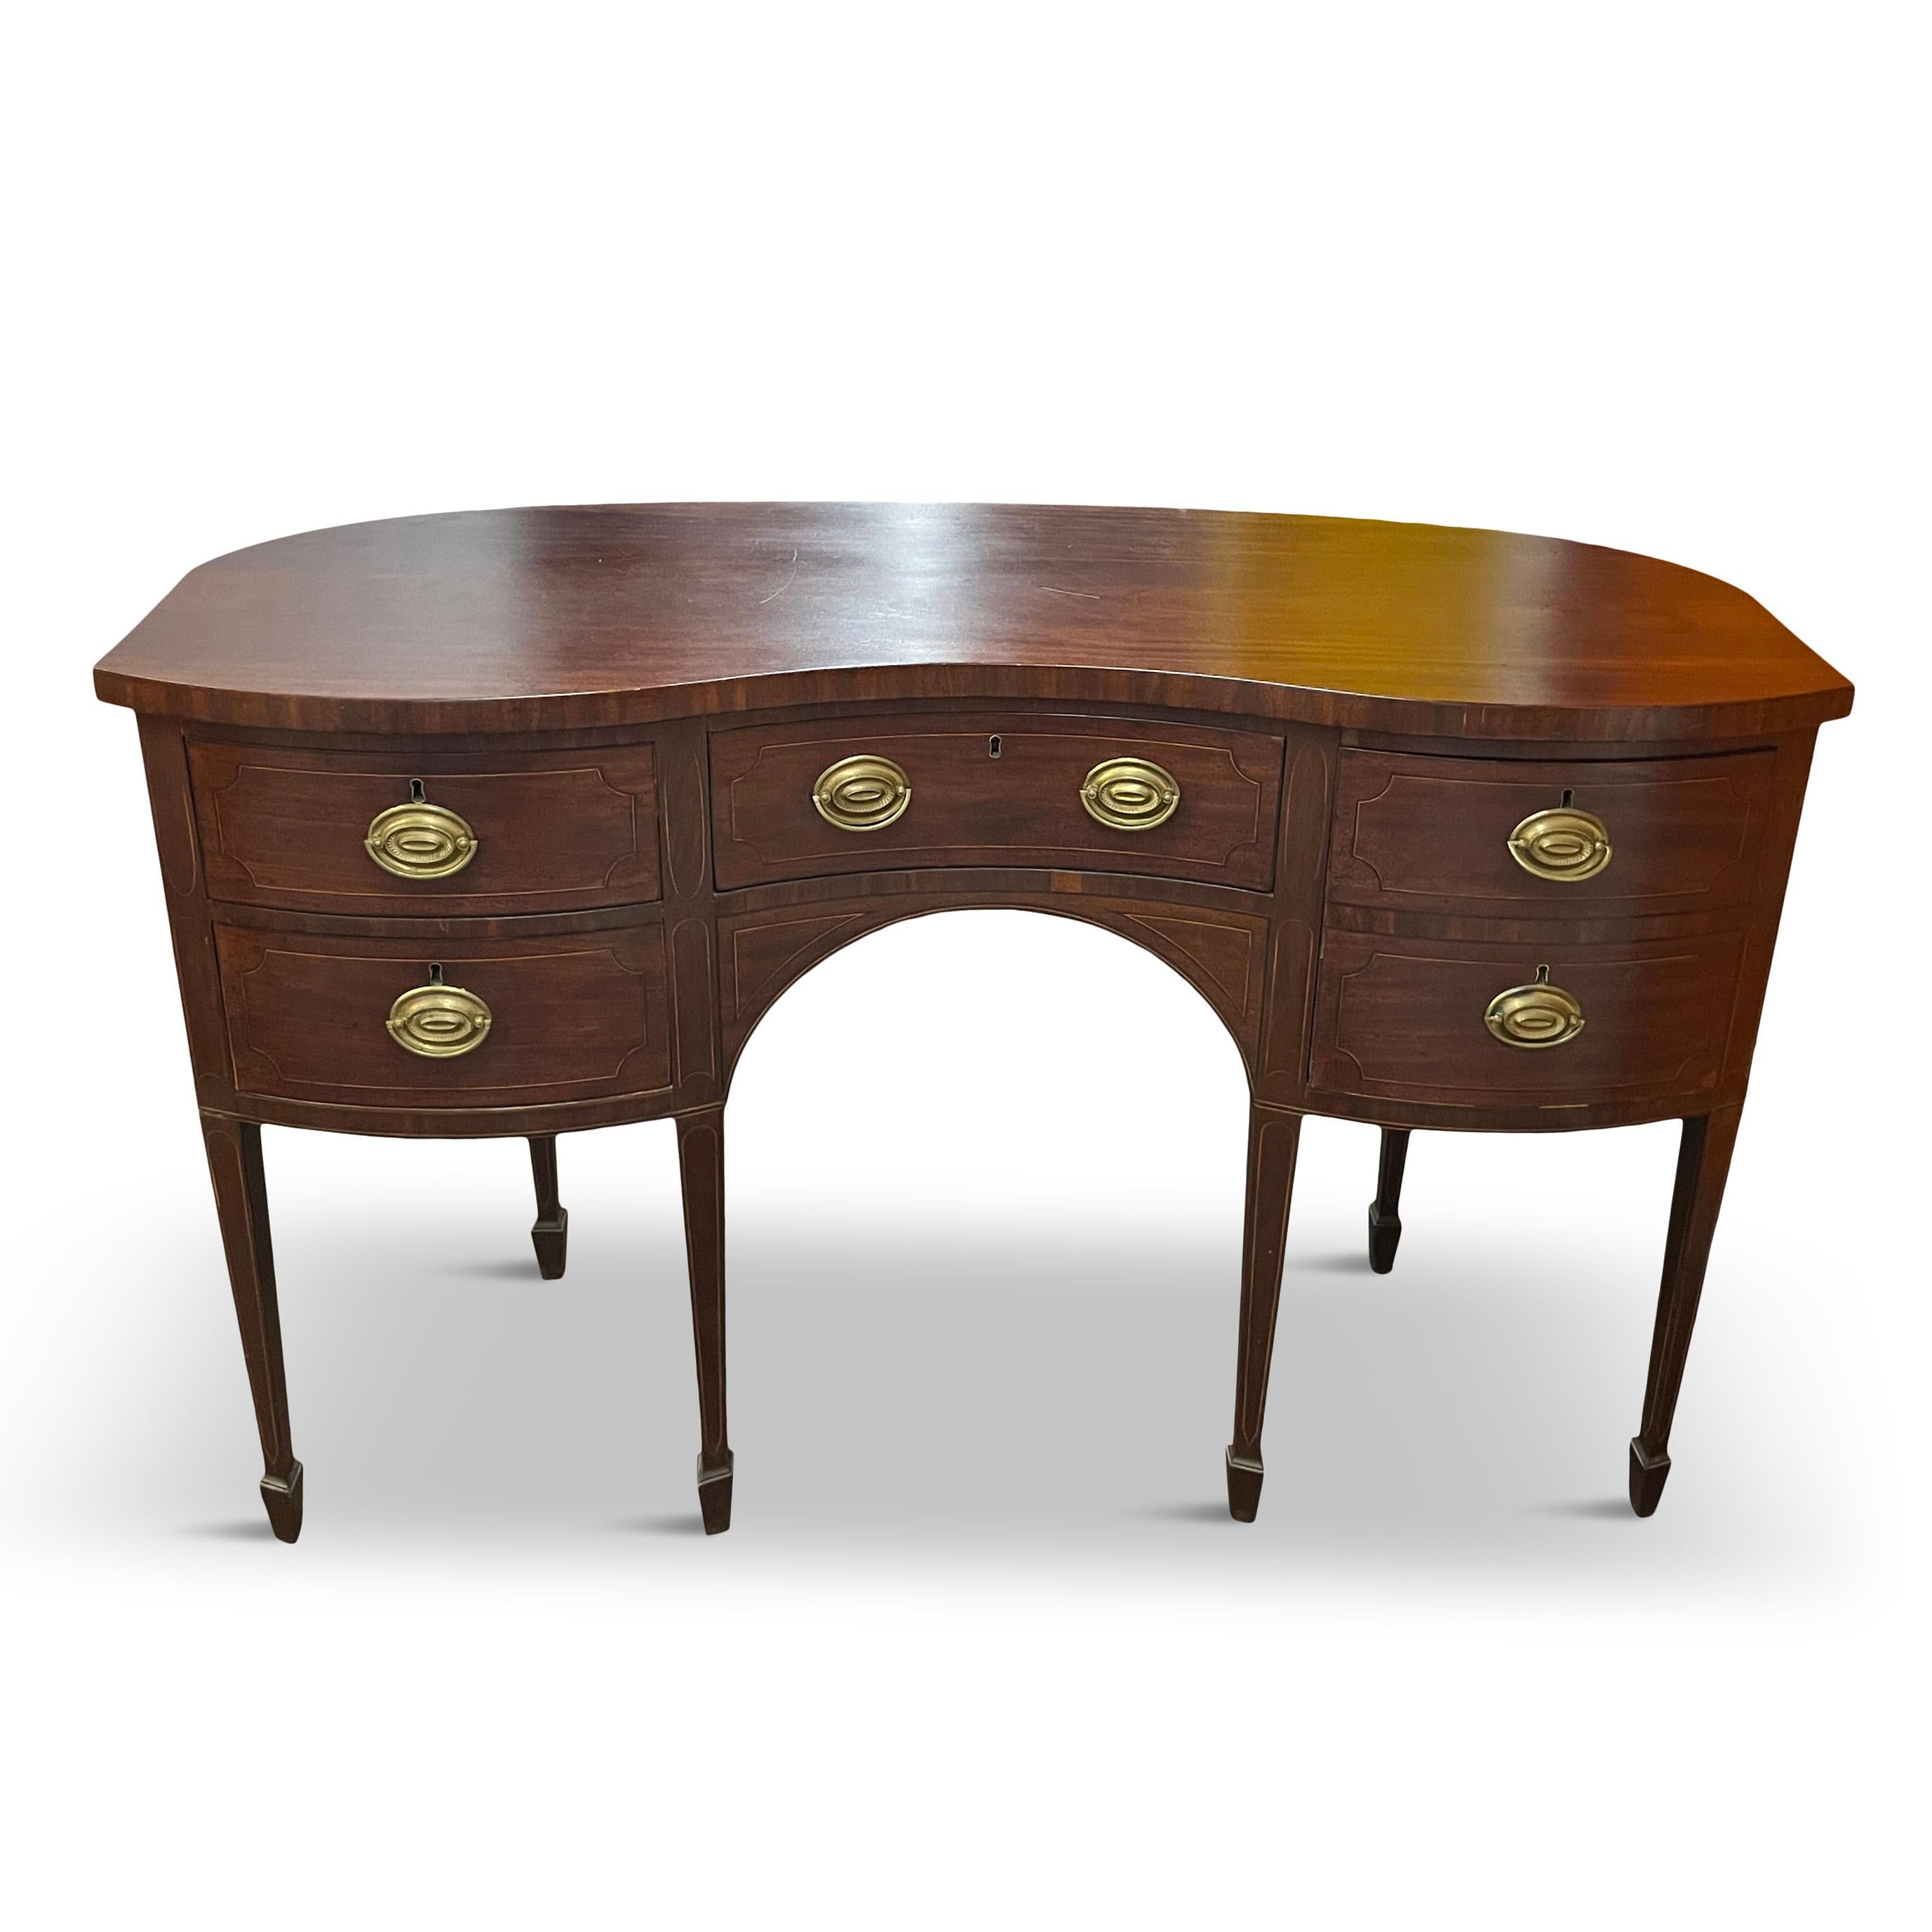 This exquisite antique sideboard is a beautiful example of the Federal style, influenced by the Regency and Hepplewhite styles. It is made of a stunningly grained mahogany with a curved bow front and sides, and has a rich patina. The sideboard